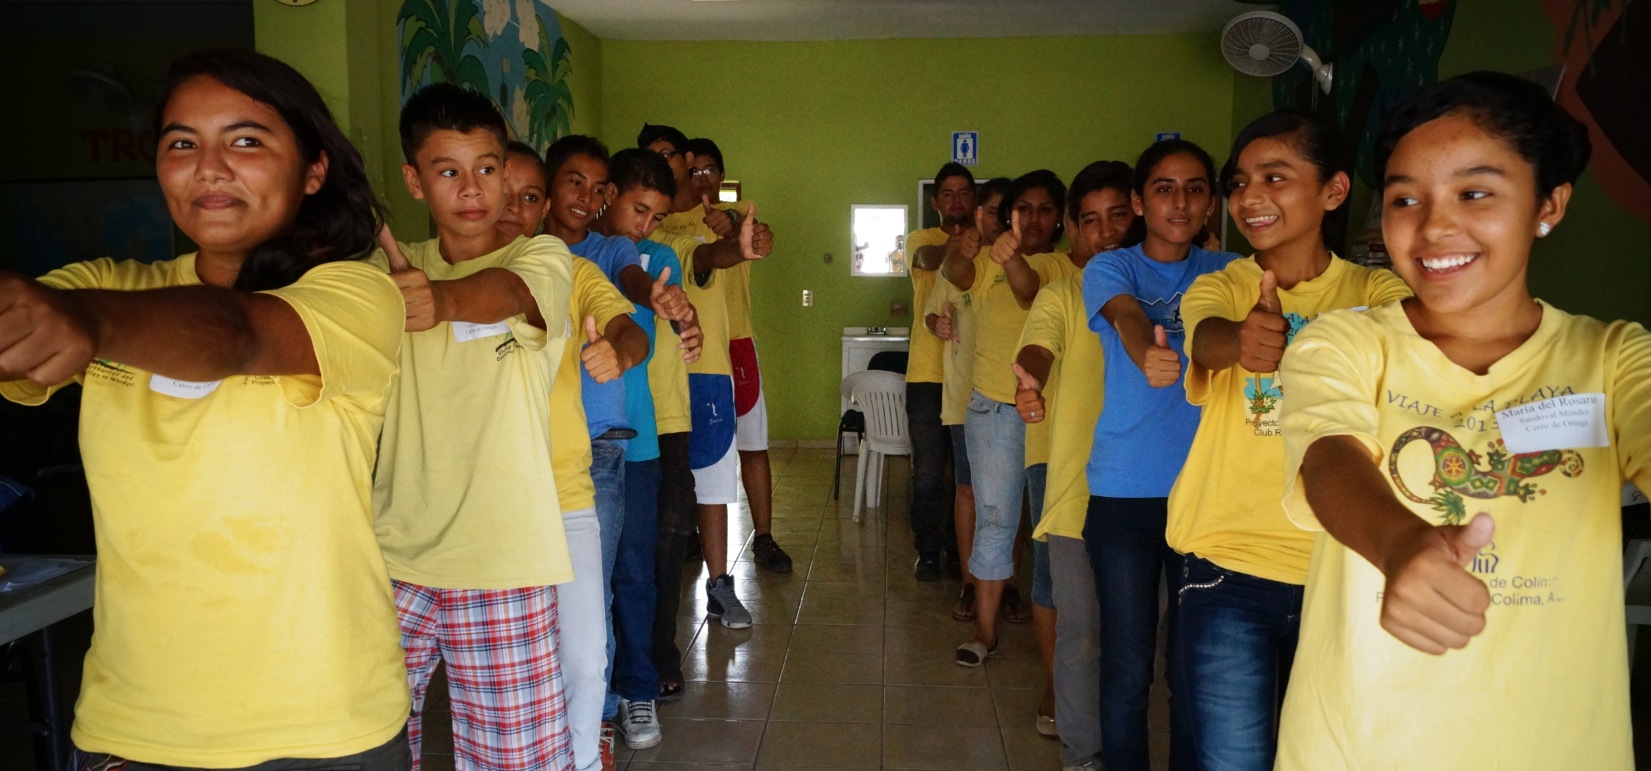 GROW Month 2014 Updates from Project Amigo